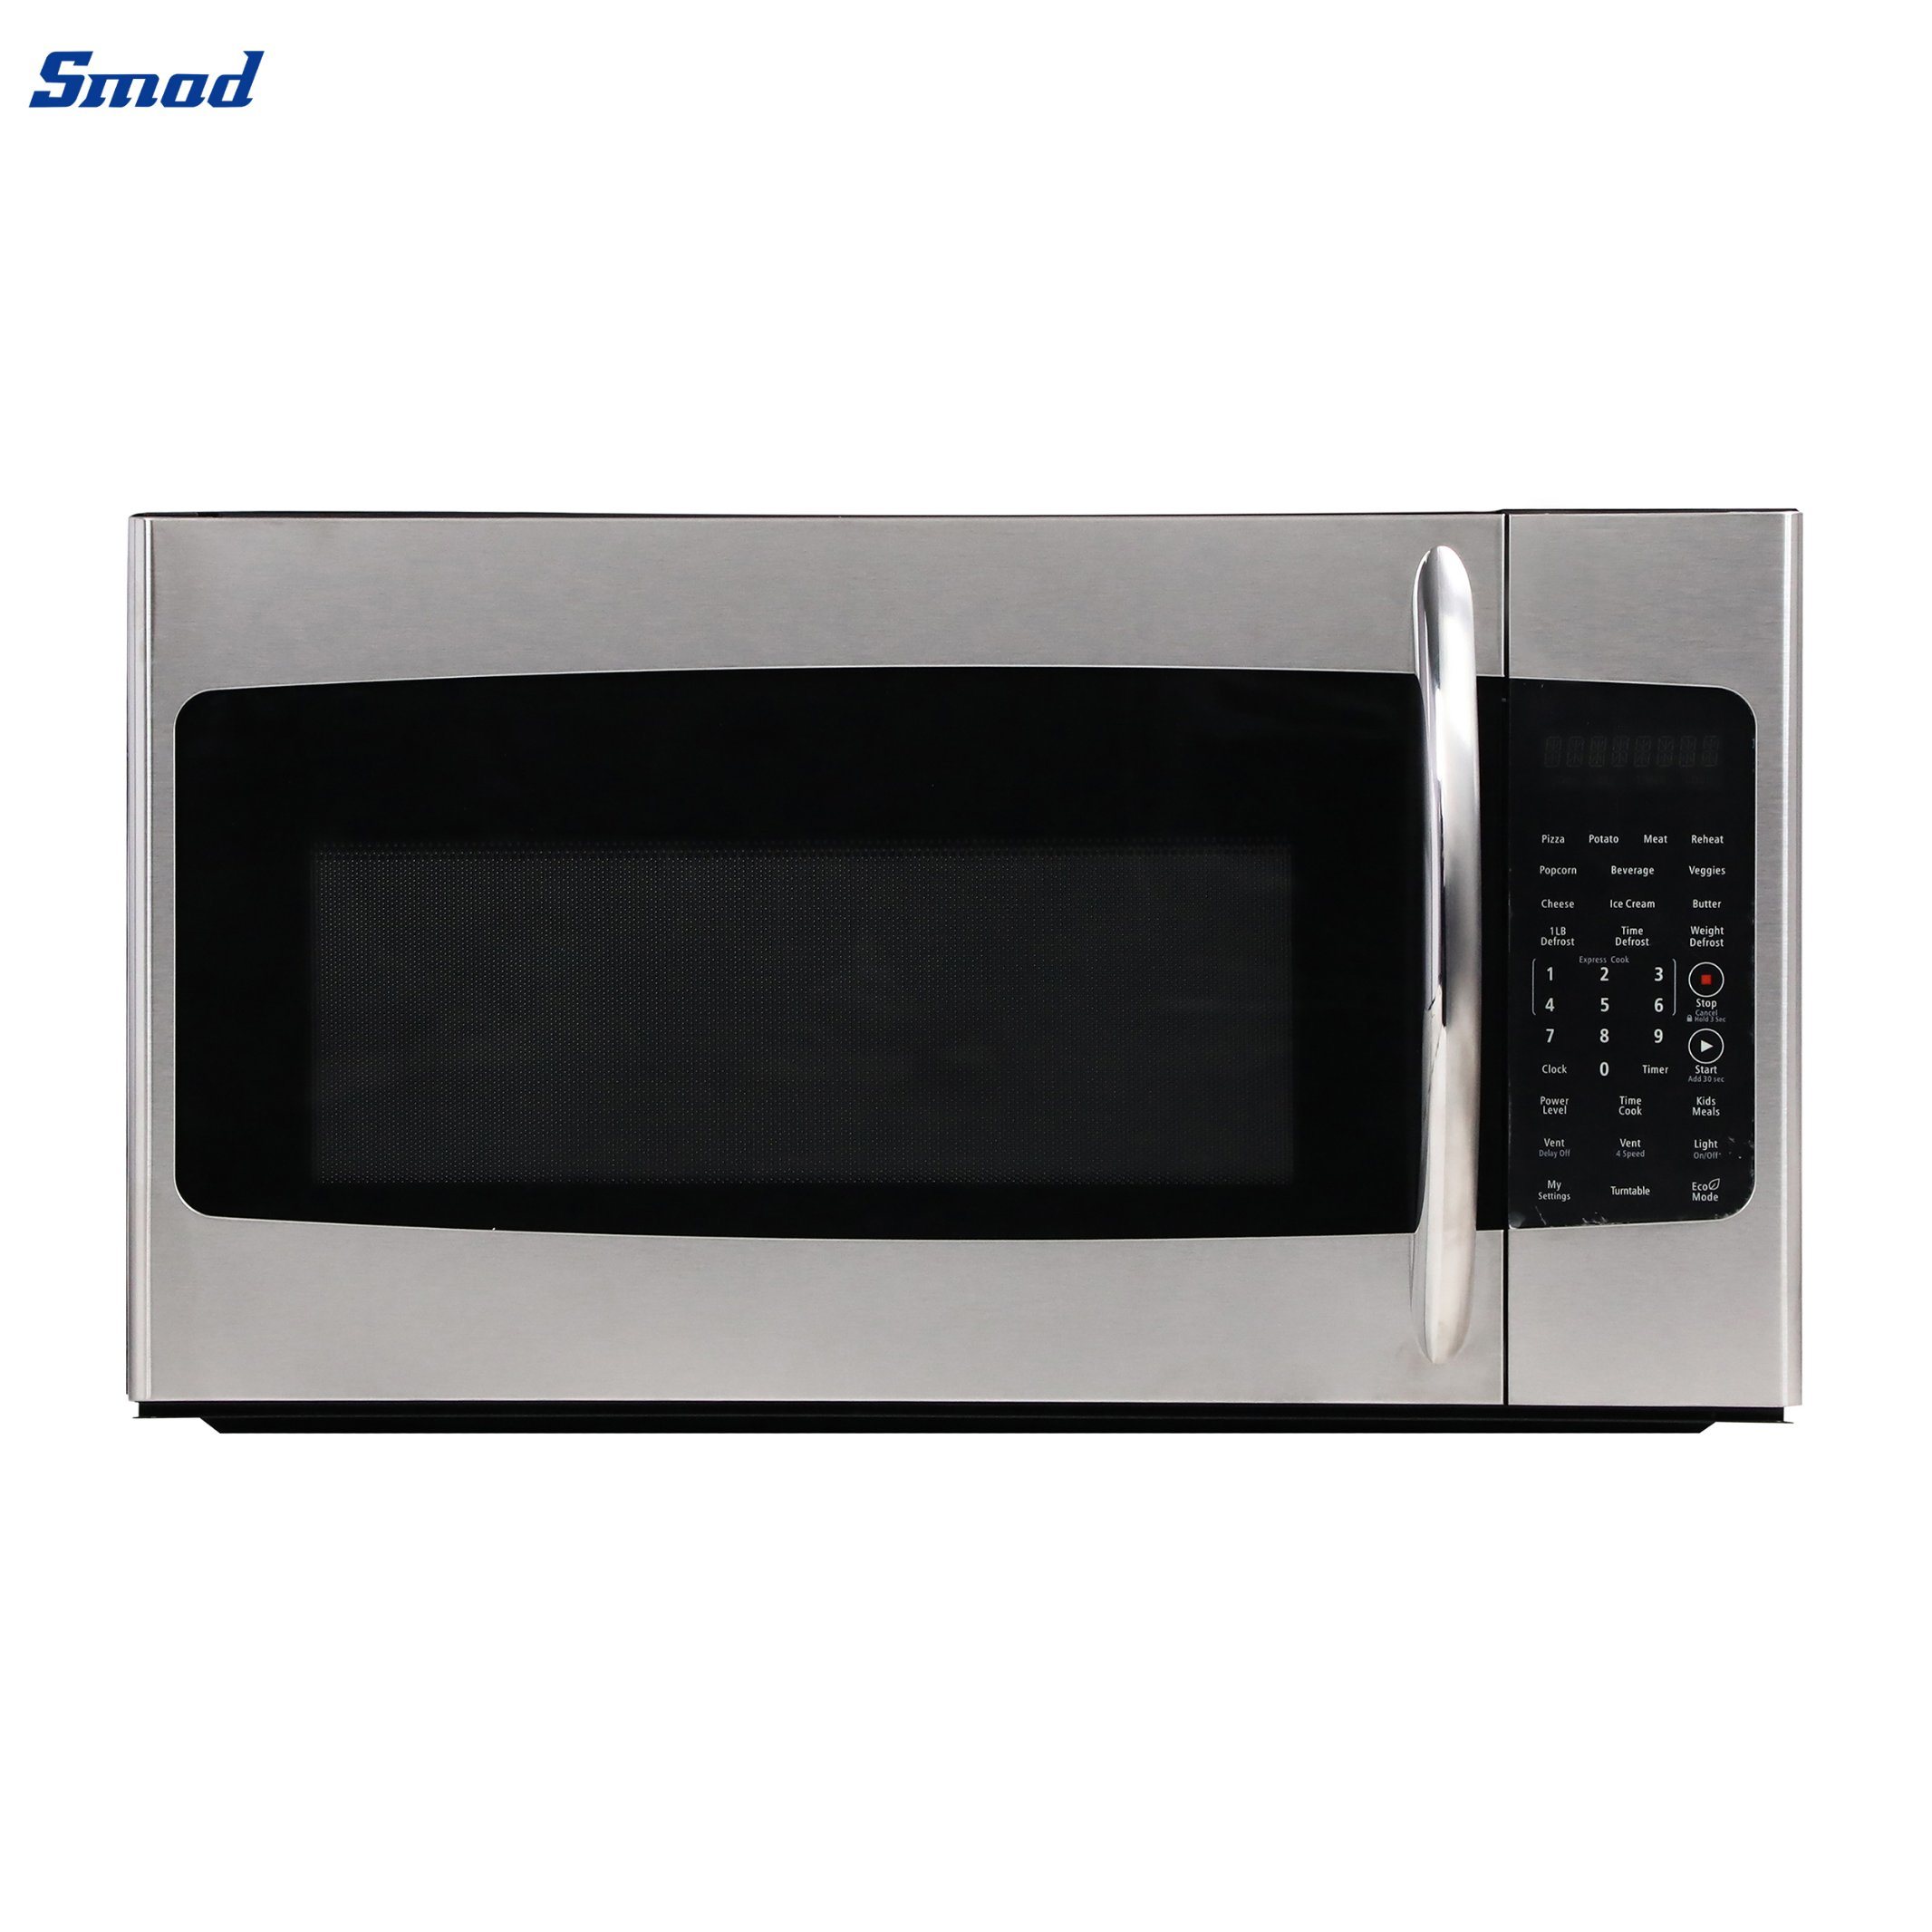 Smad 1.6 Cu. Ft. 1000W Over the Range Microwave Oven with Removable Glass